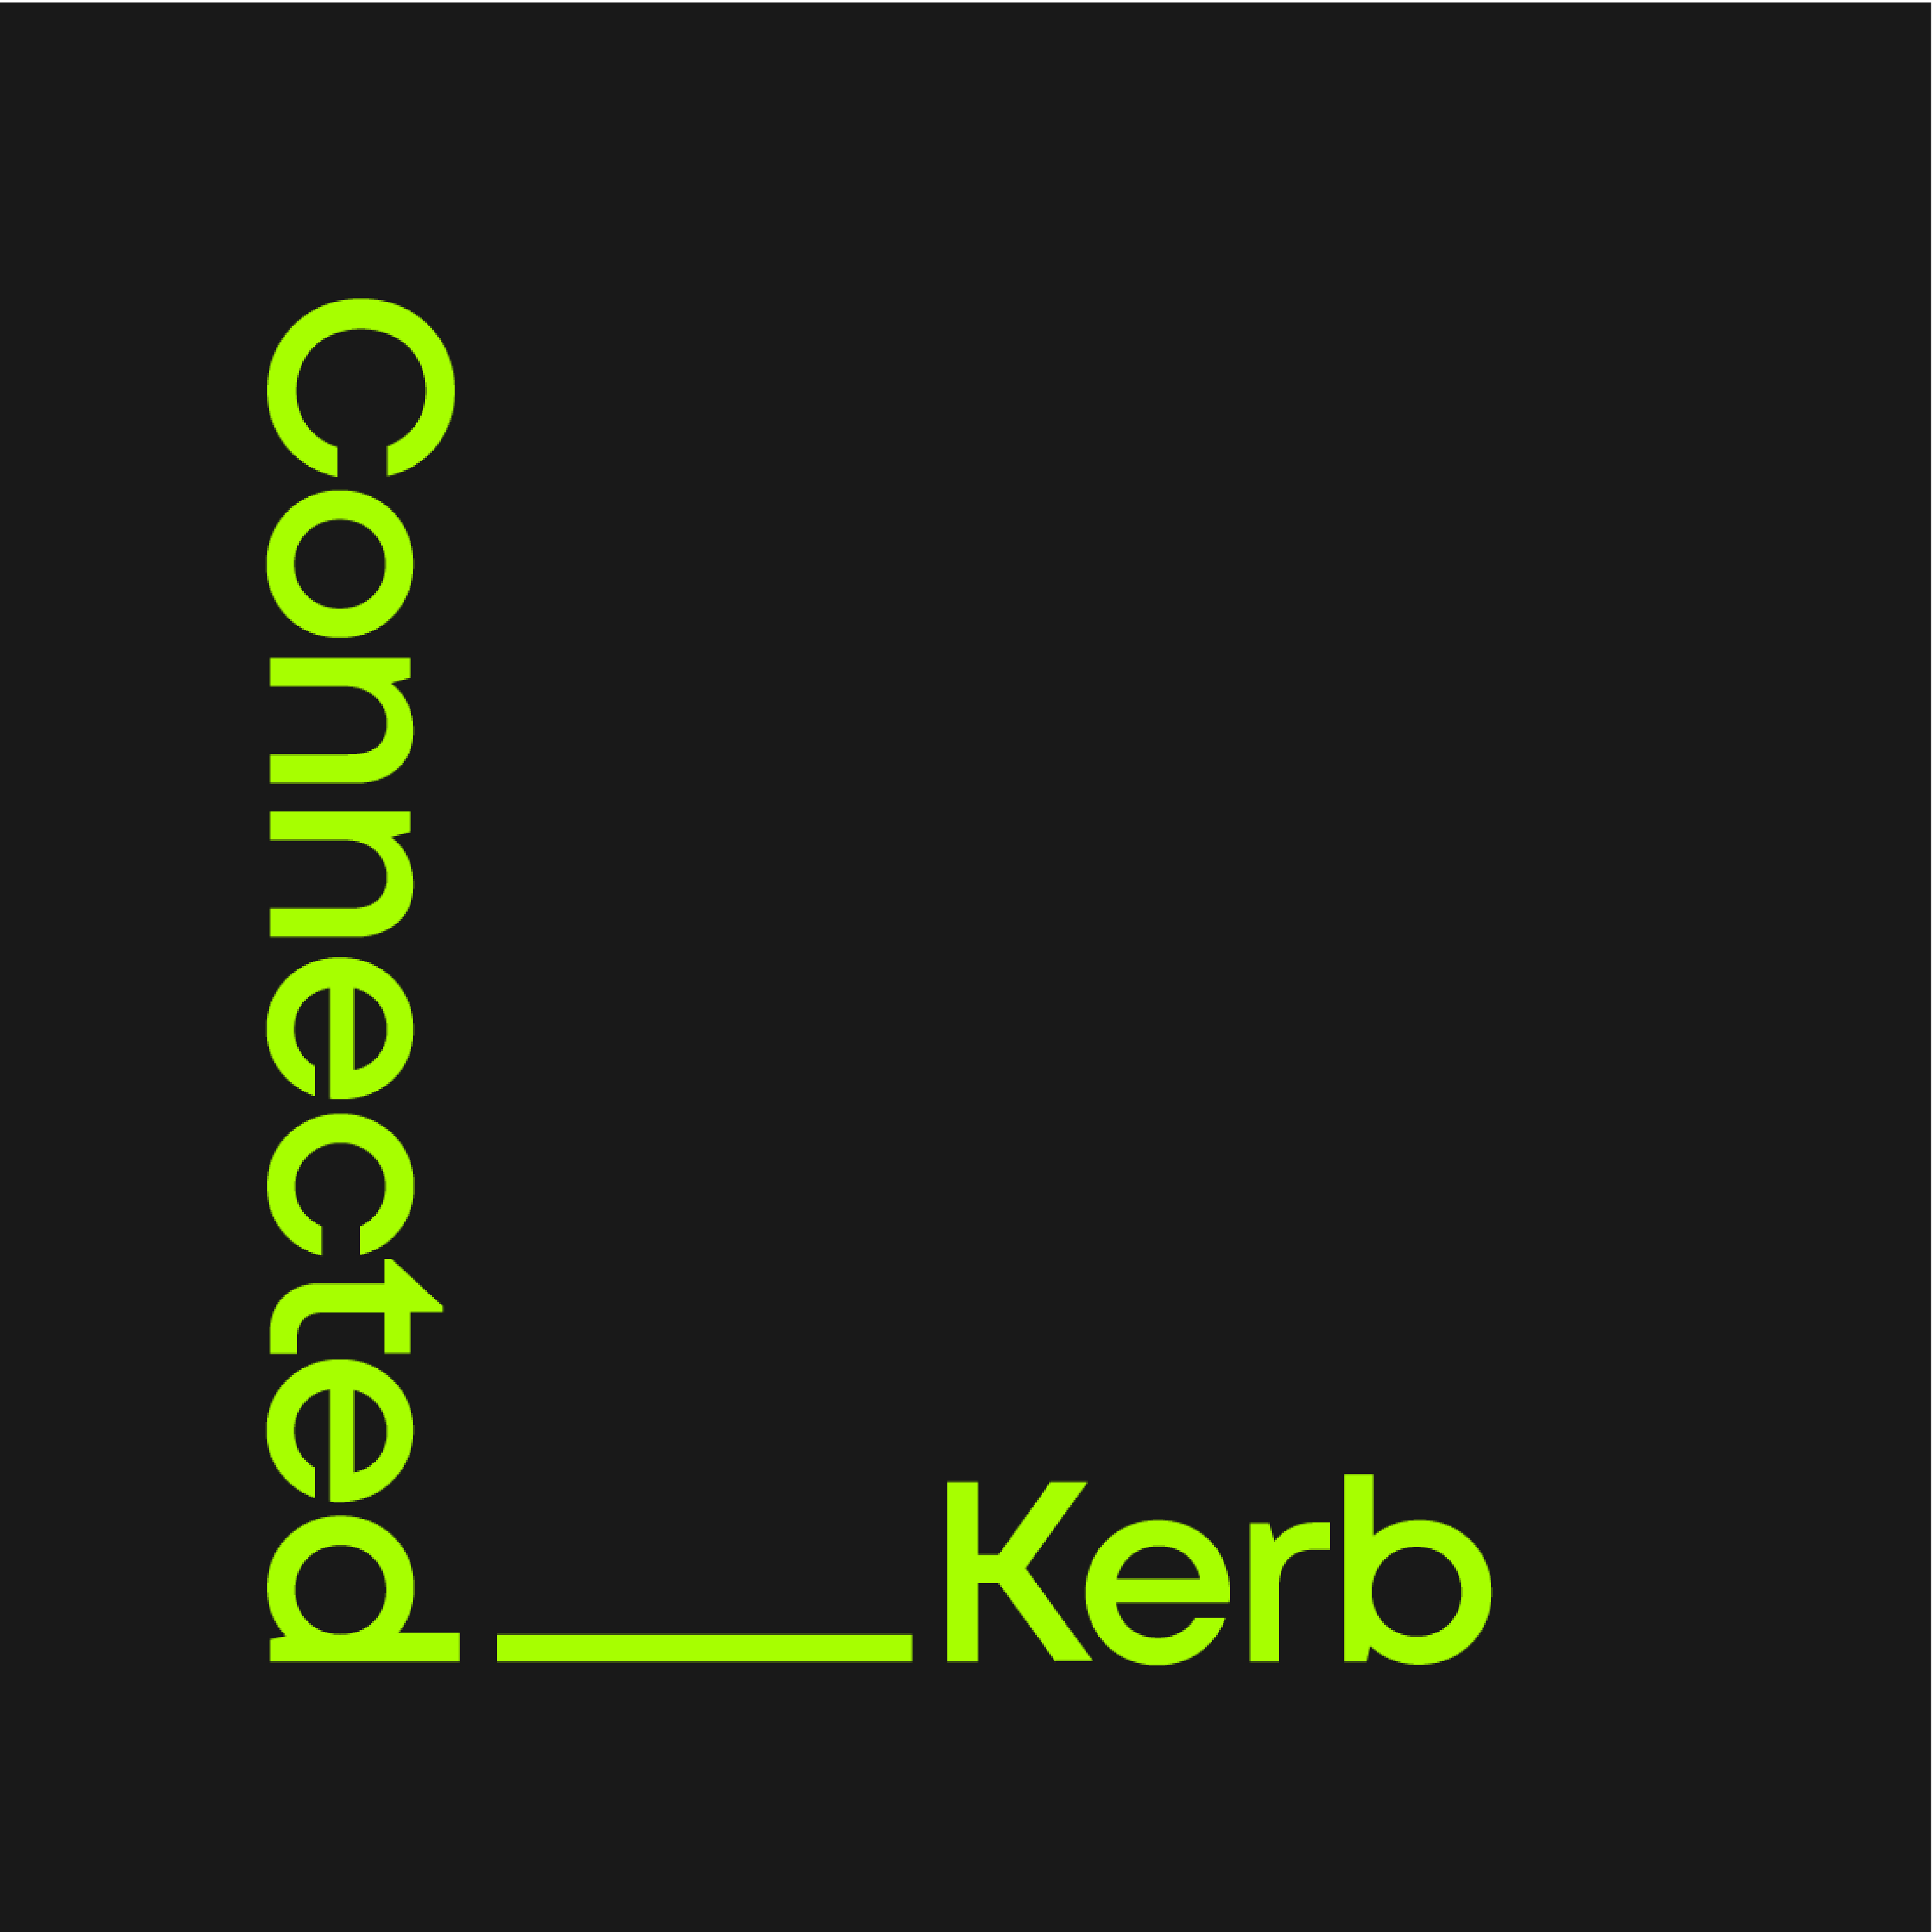 Connected Kerb Charging Station Logo